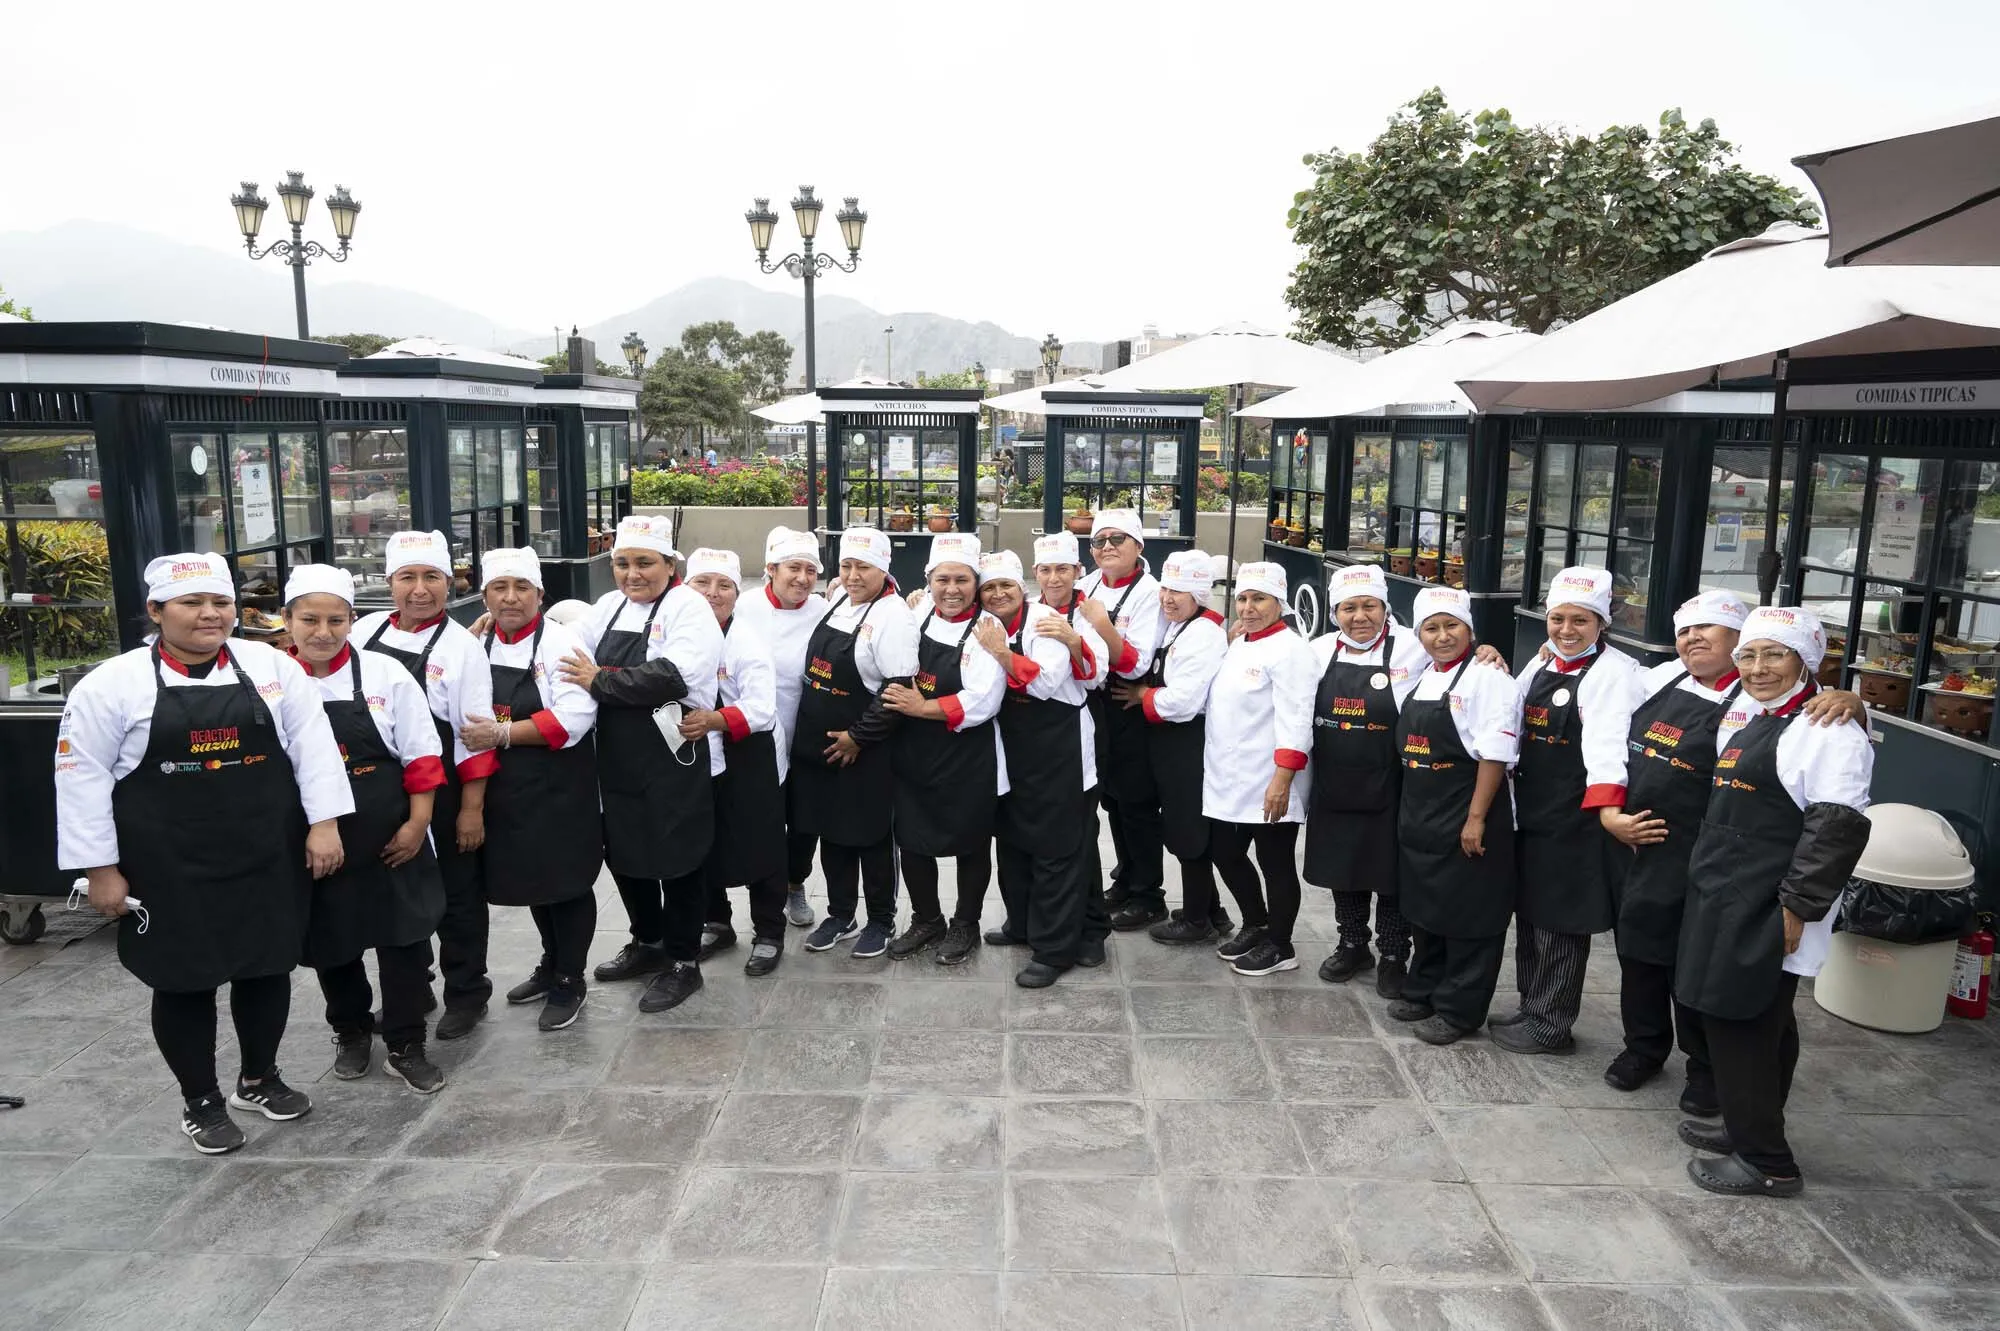 Outdoor group photo of 19 people dressed in aprons, kitchen whites and chef's hats.